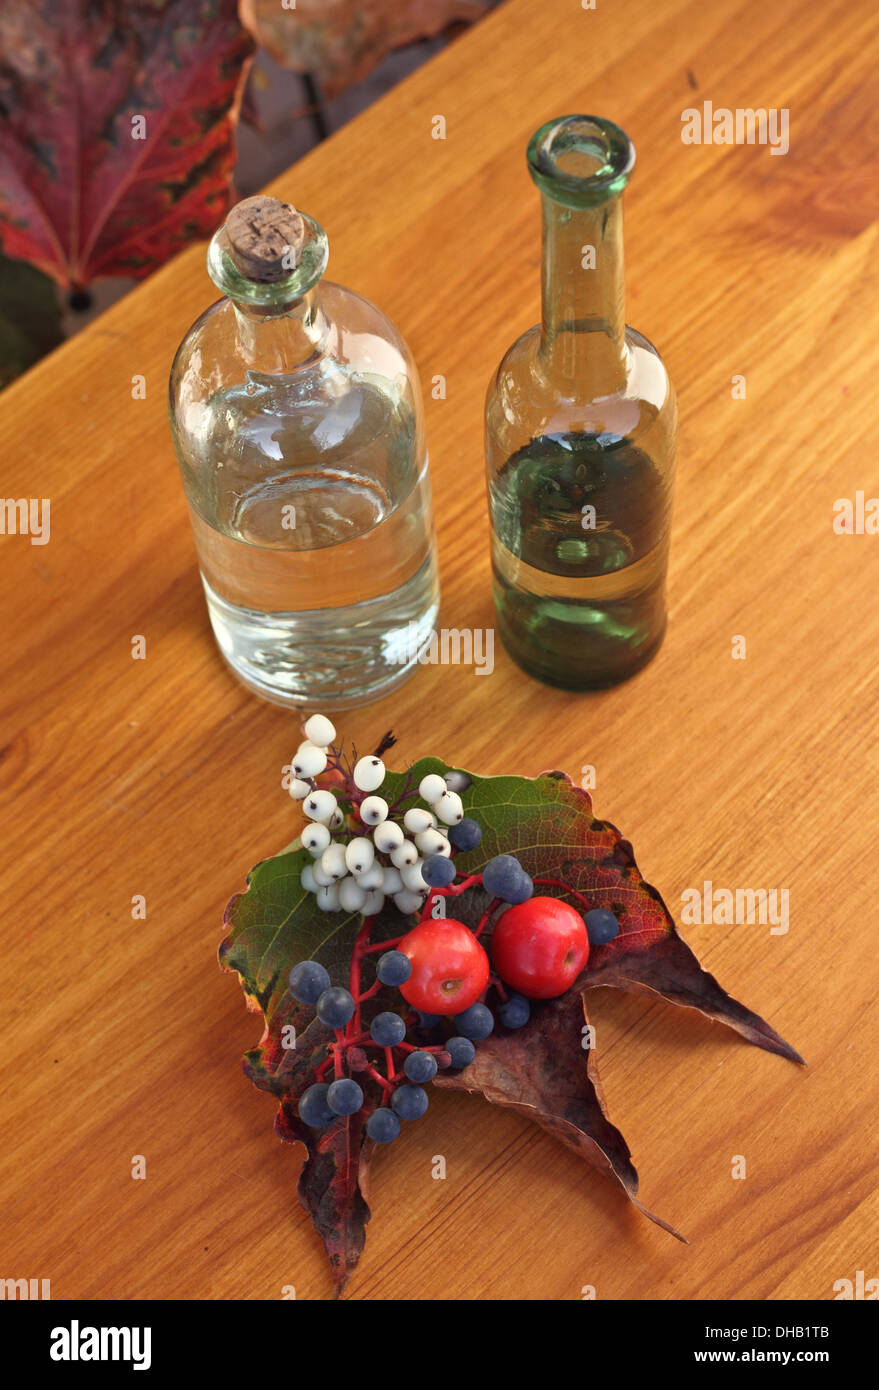 Two vintage bottles, blueberry and two small red apples on table Stock Photo